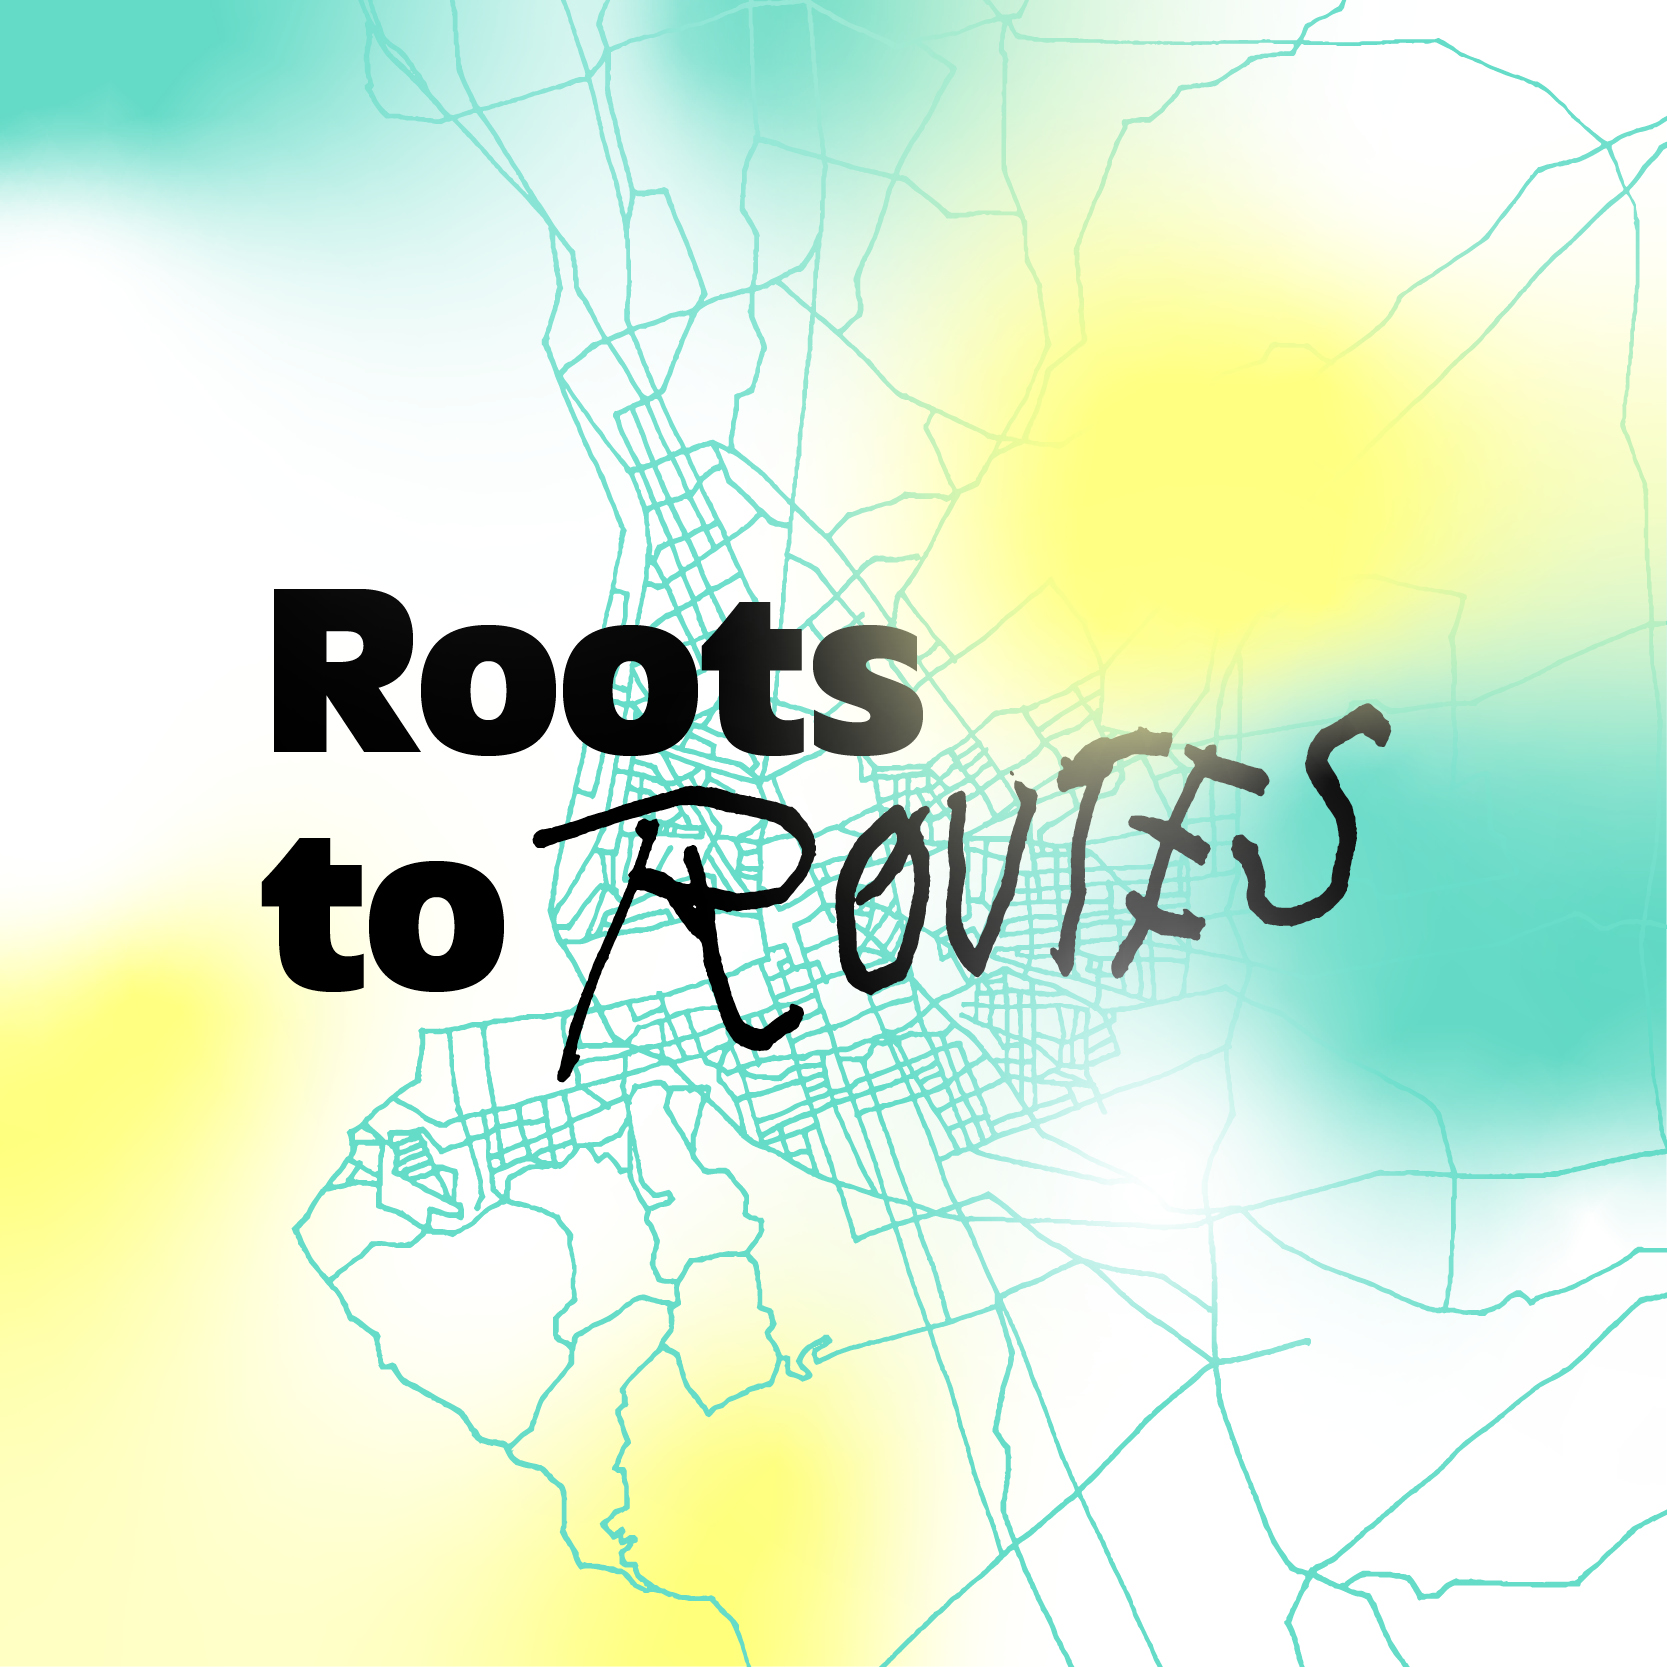 ROOTS TO ROUTES - Visual by Vikto Gurov